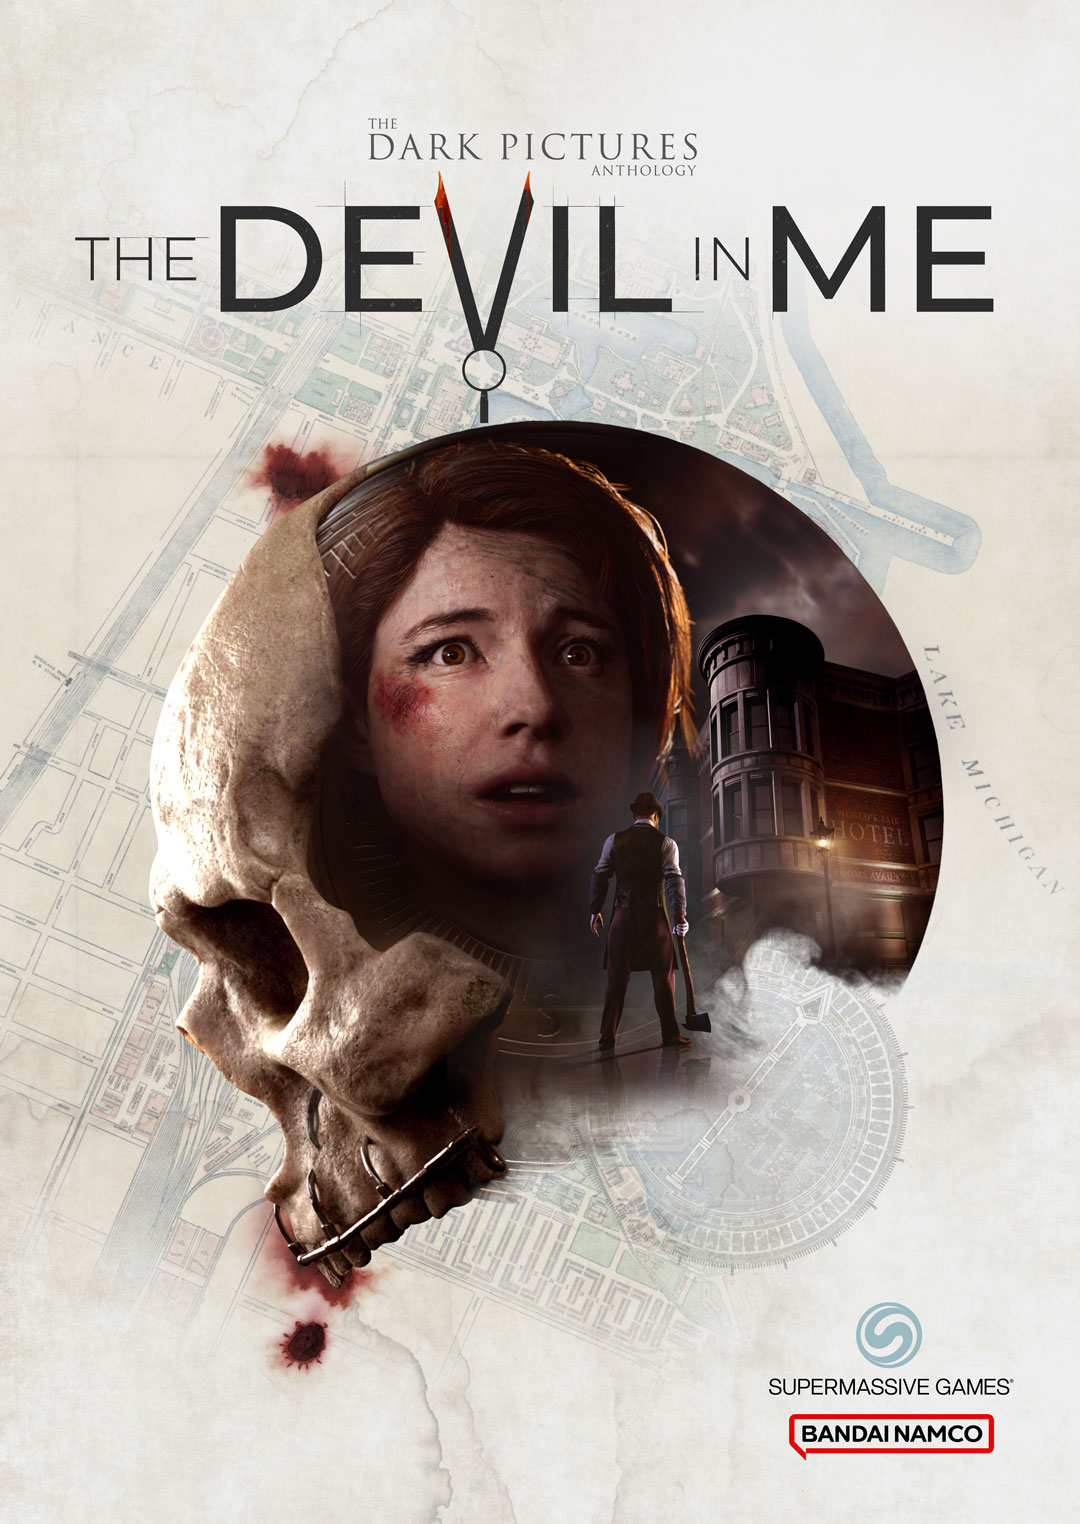 The Dark Pictures: The Devil in Me Digital Standard Edition Product Image